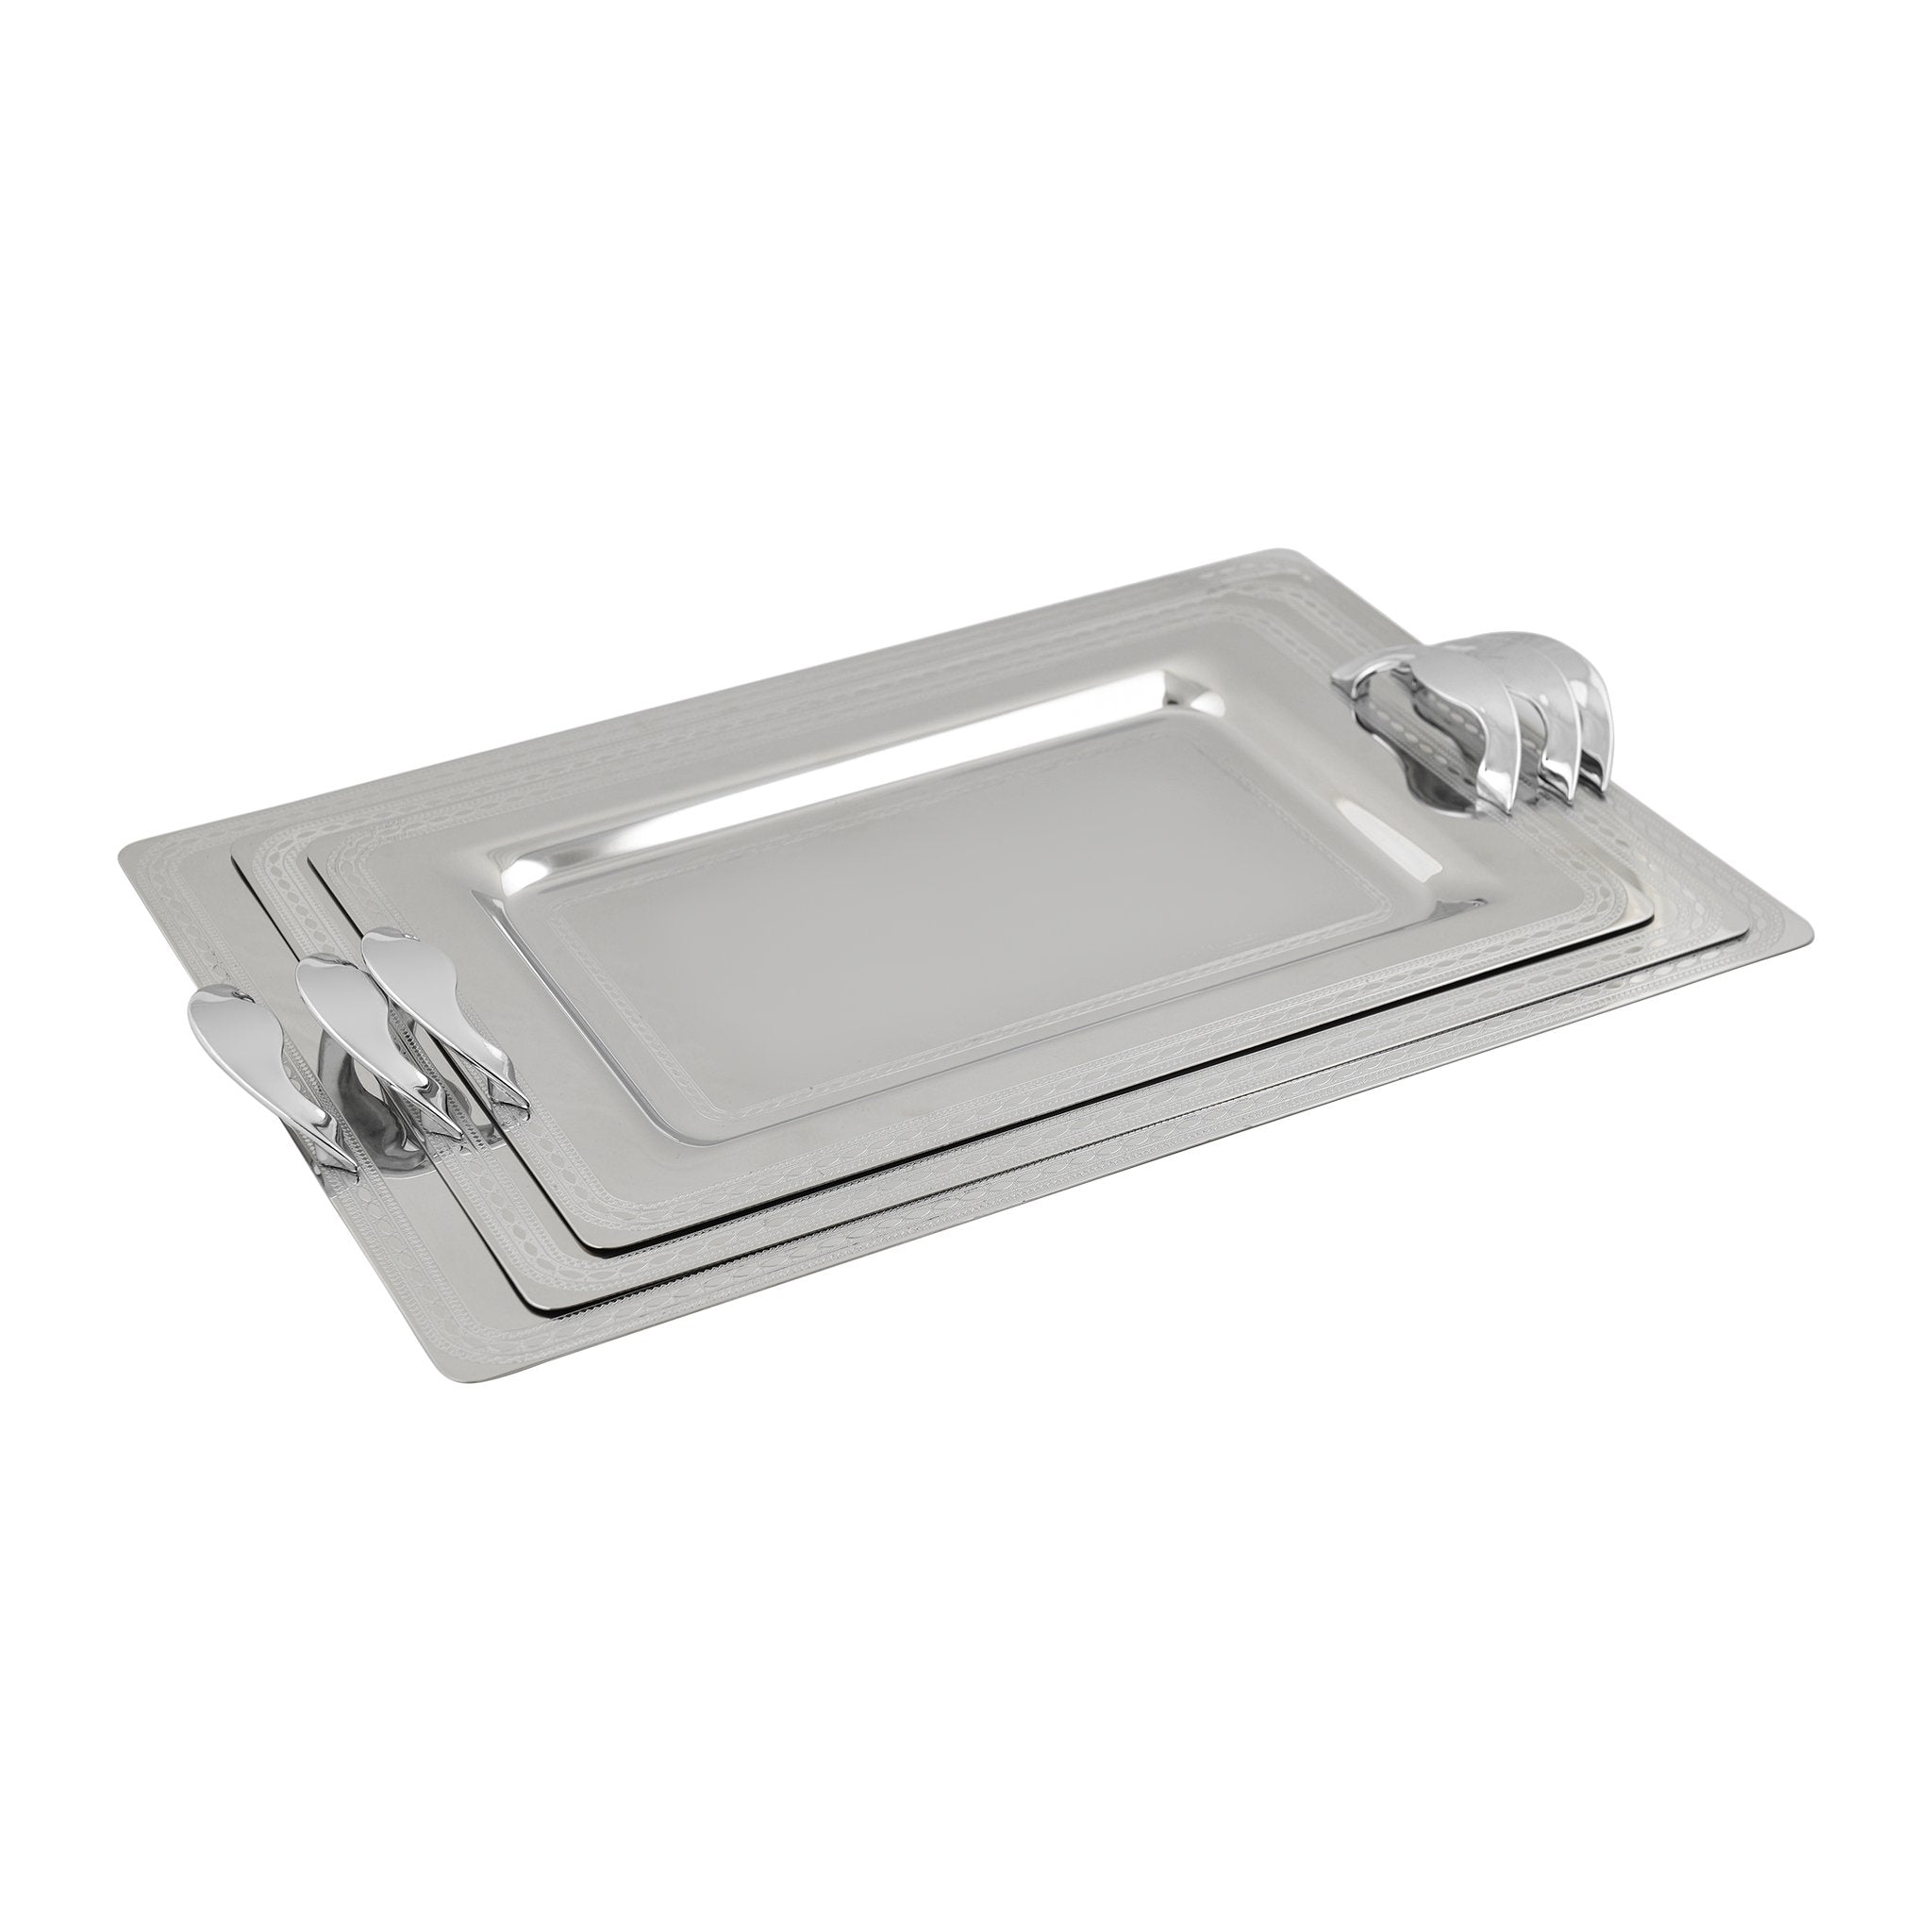 Elegant Gioiel - Rectangular Tray Set with Handles 3 Pieces - Stainless Steel 18/10 - 7500092